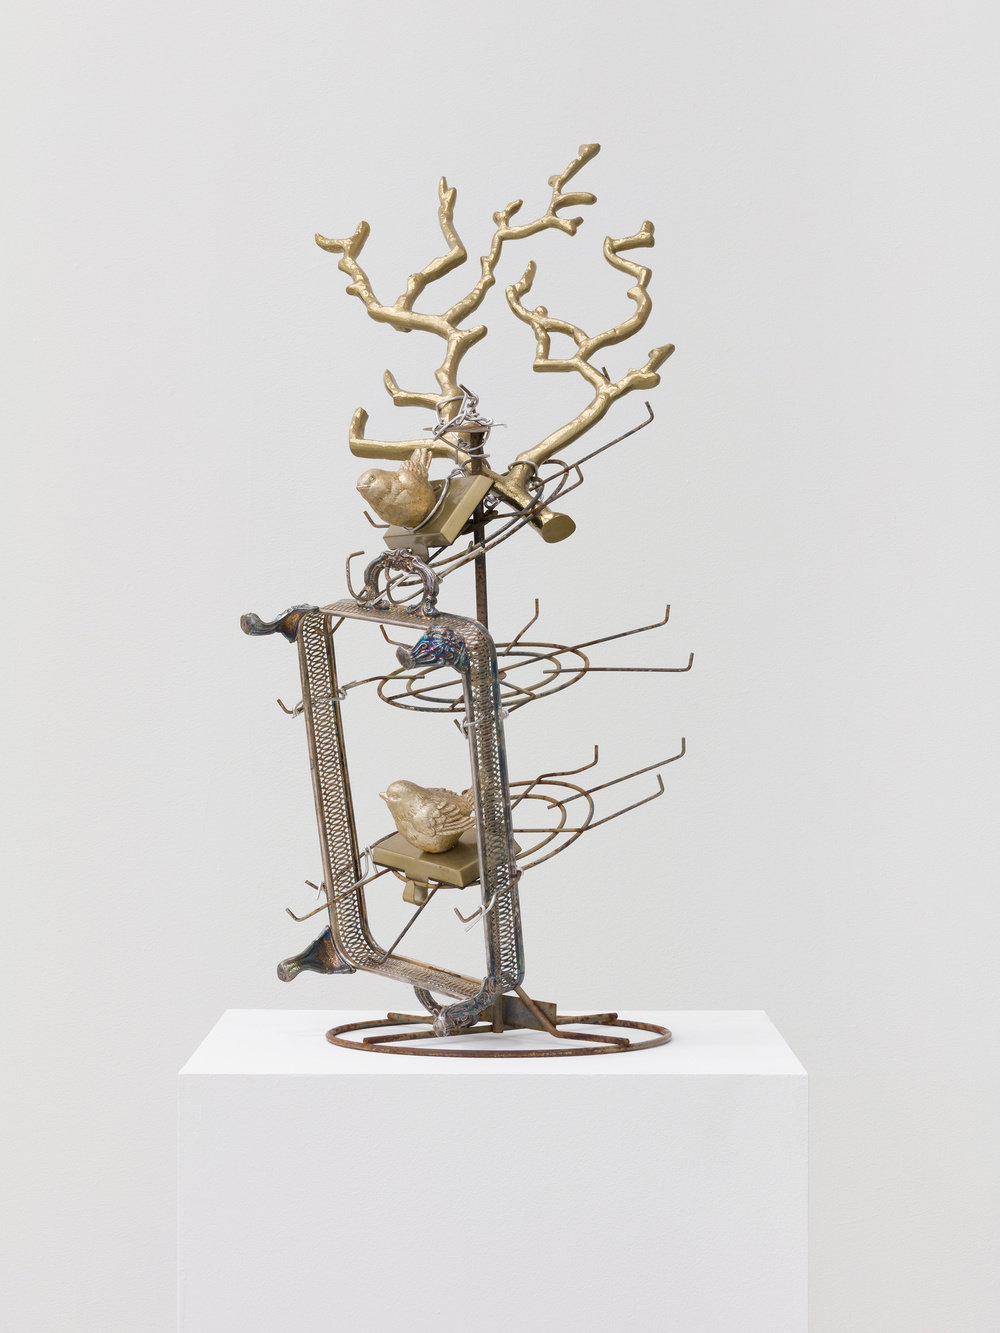 A sculpture by Joe Minter composed of metal objects and wire. 